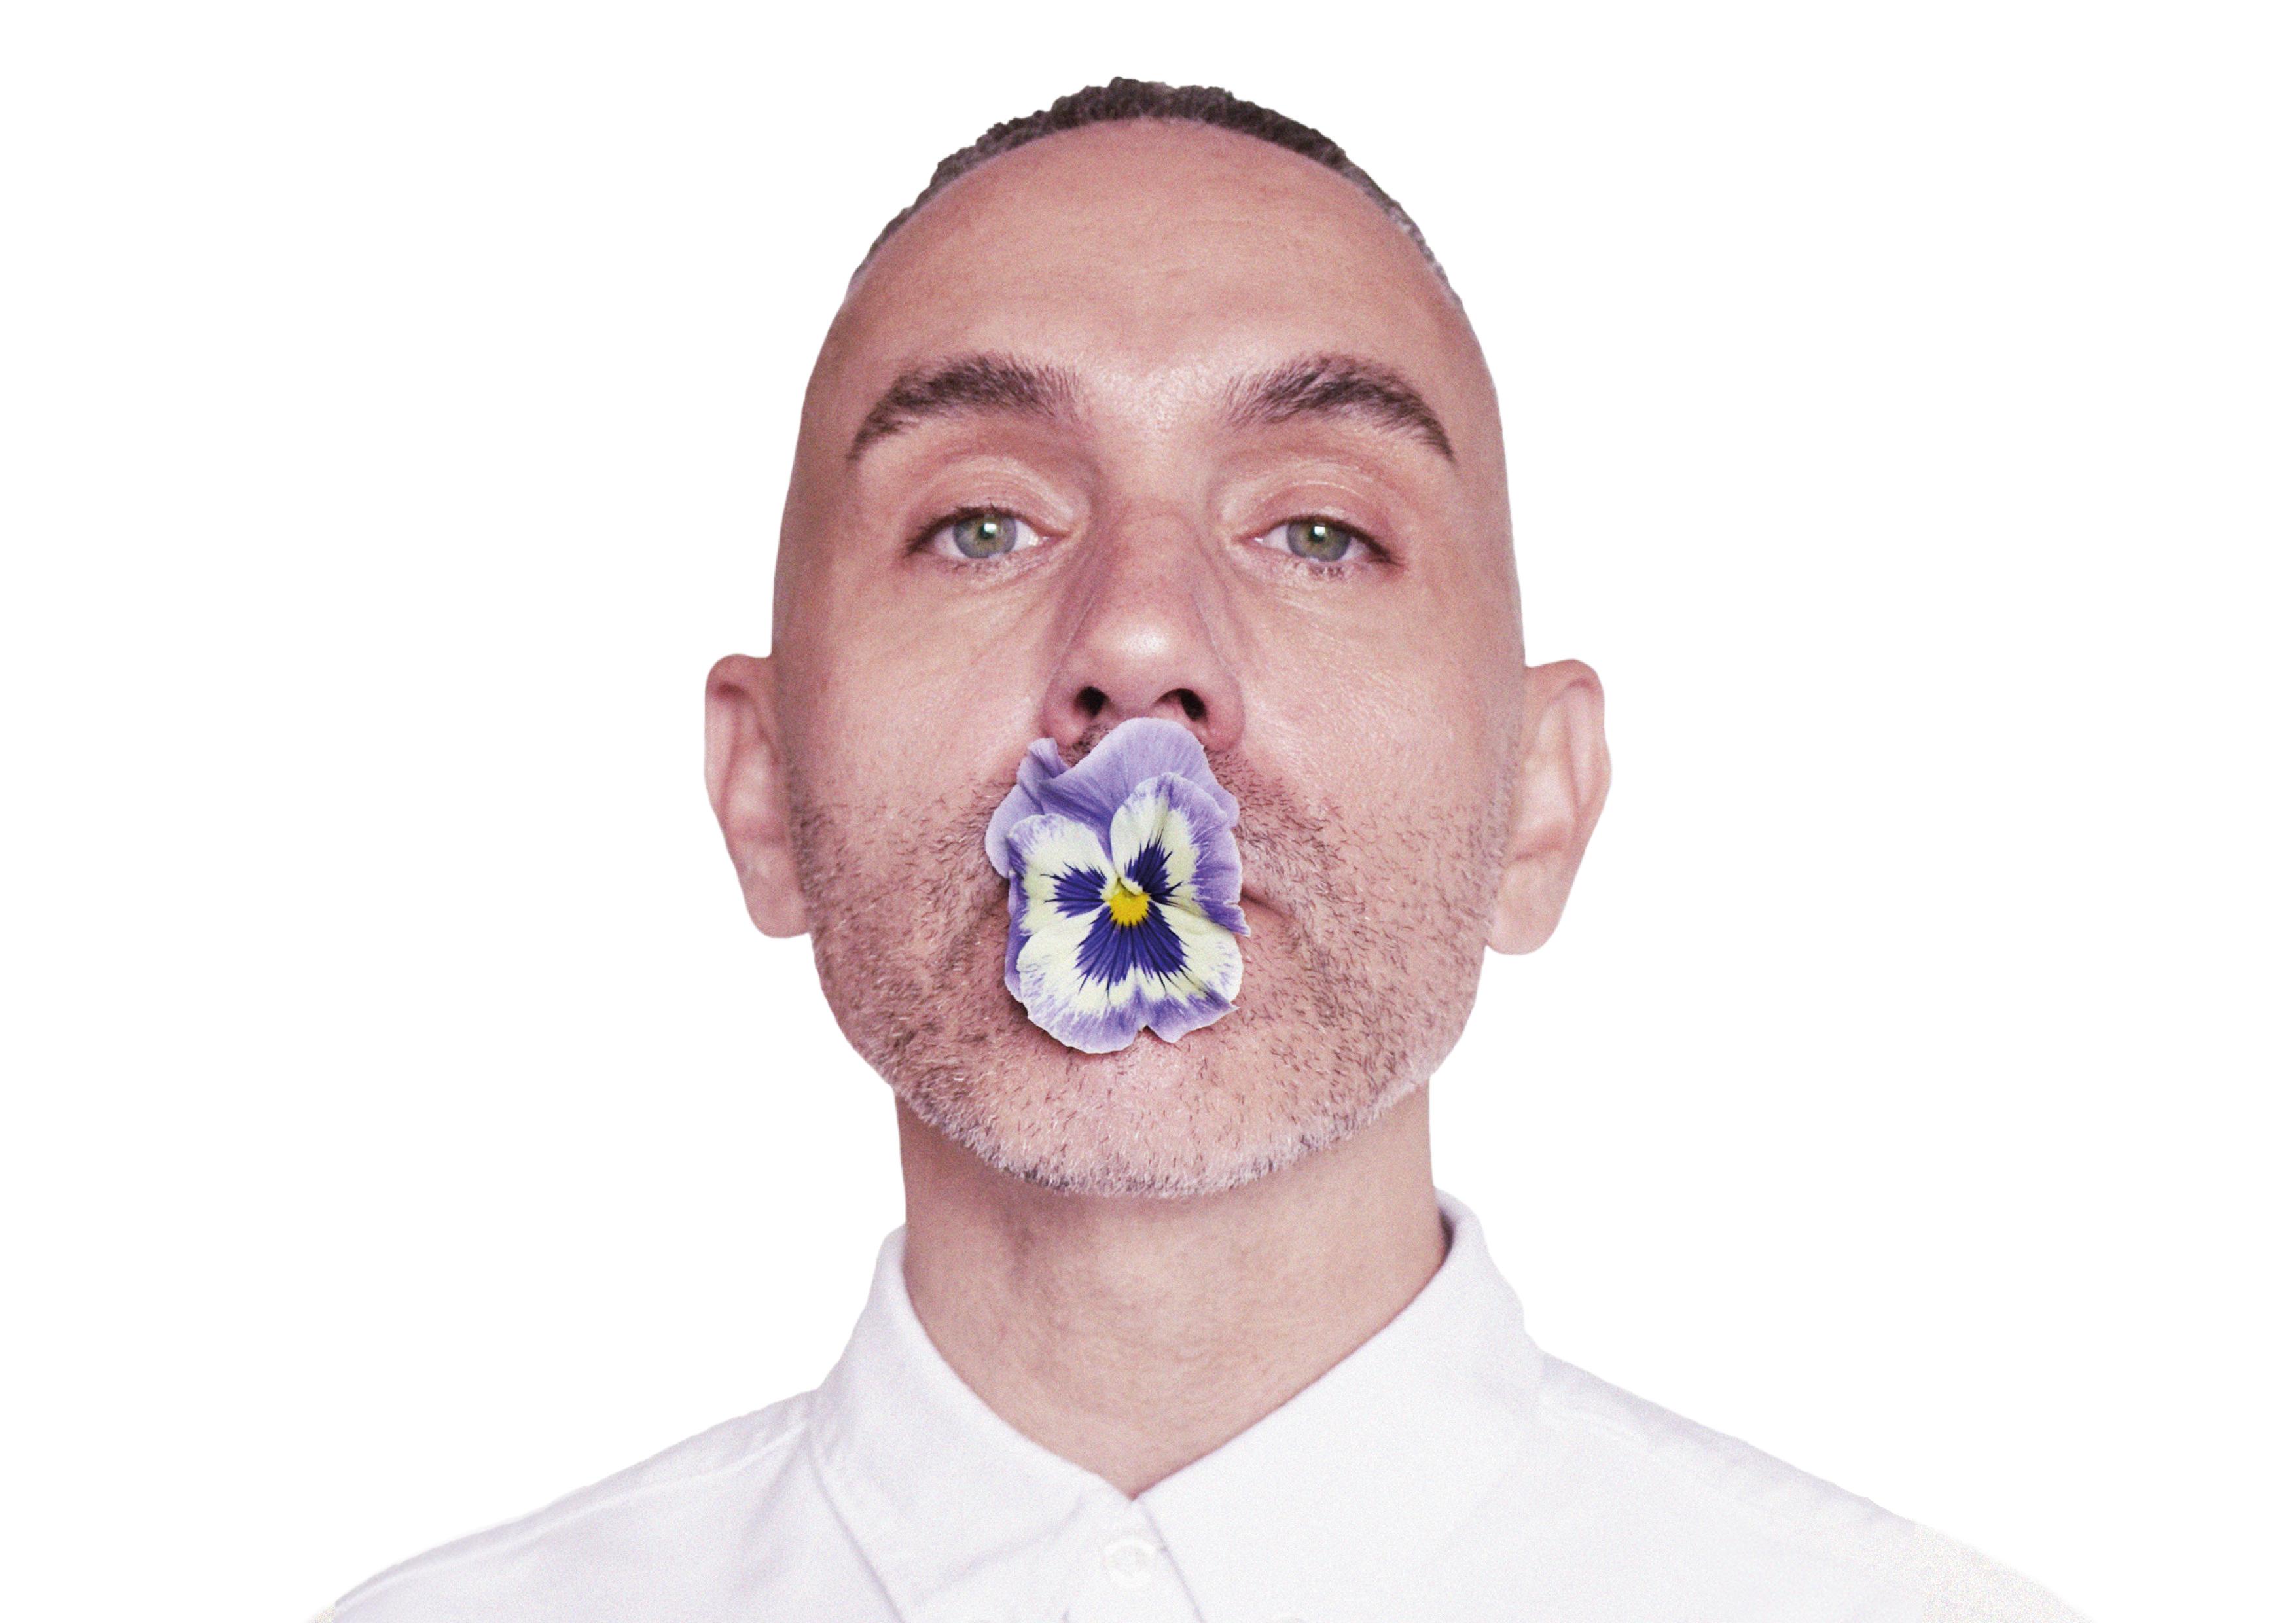 Artist Paul Harfleet with a pansy in his mouth